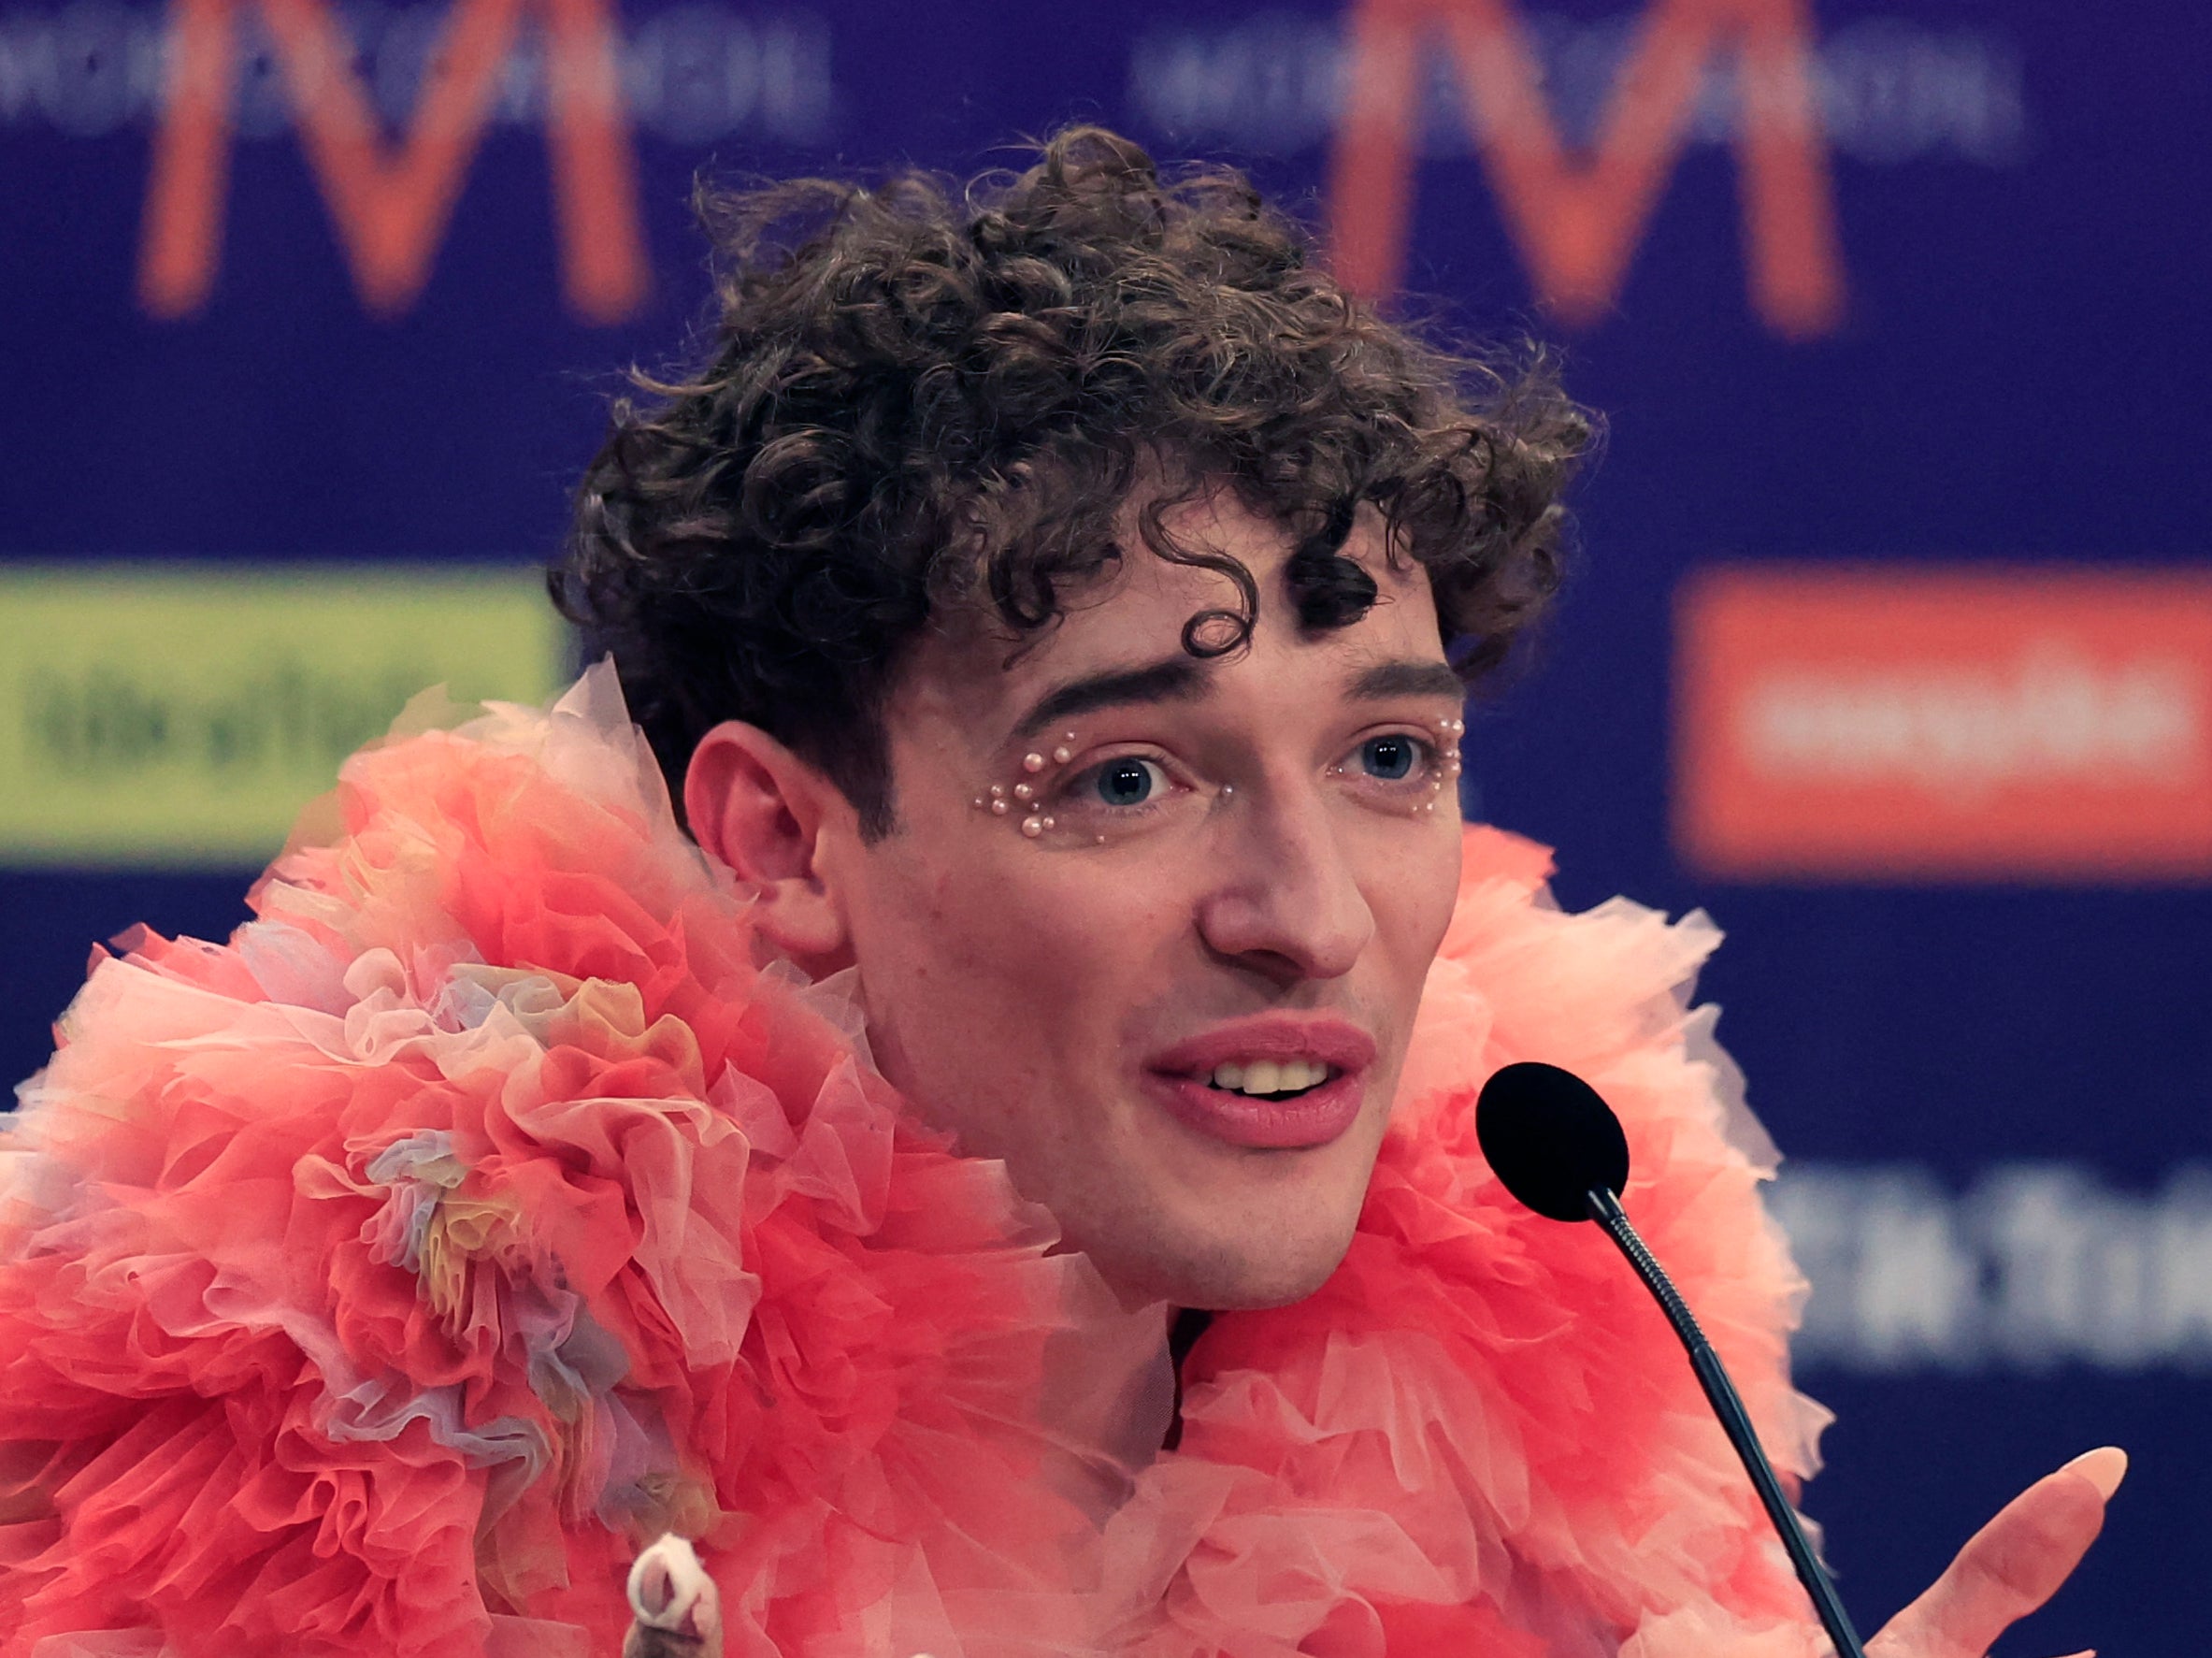 Eurovision winner Nemo has hit out at organisers over behind-the-scenes drama